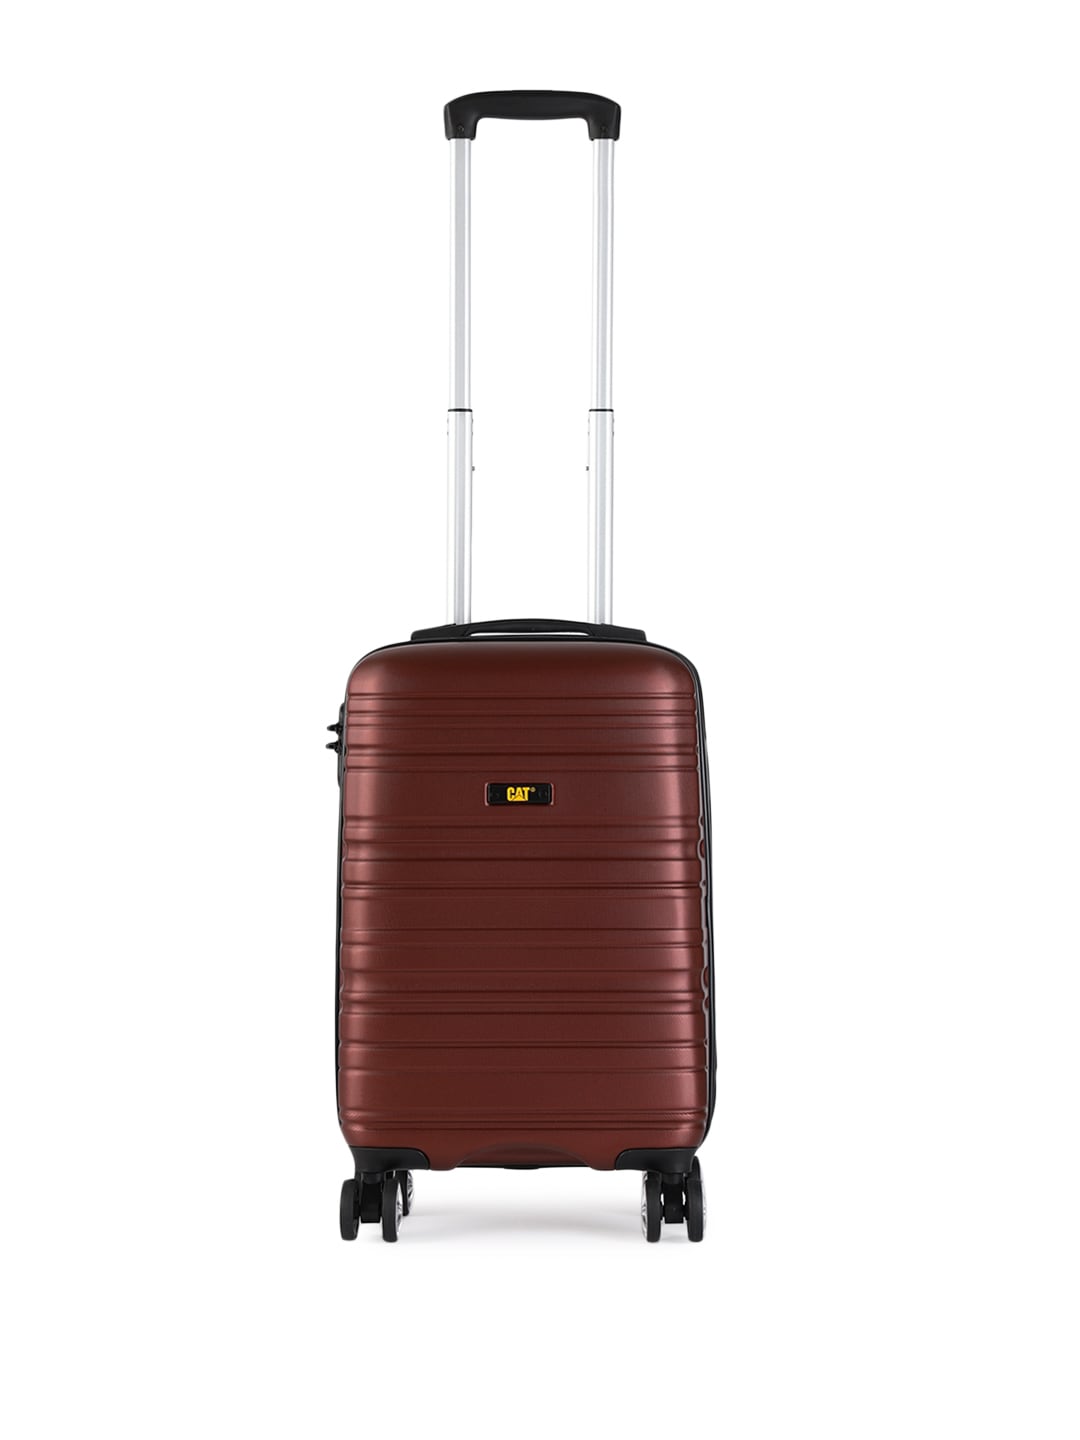 CAT Brown COCOON Textured Hard Side Cabin Trolley Suitcase Price in India